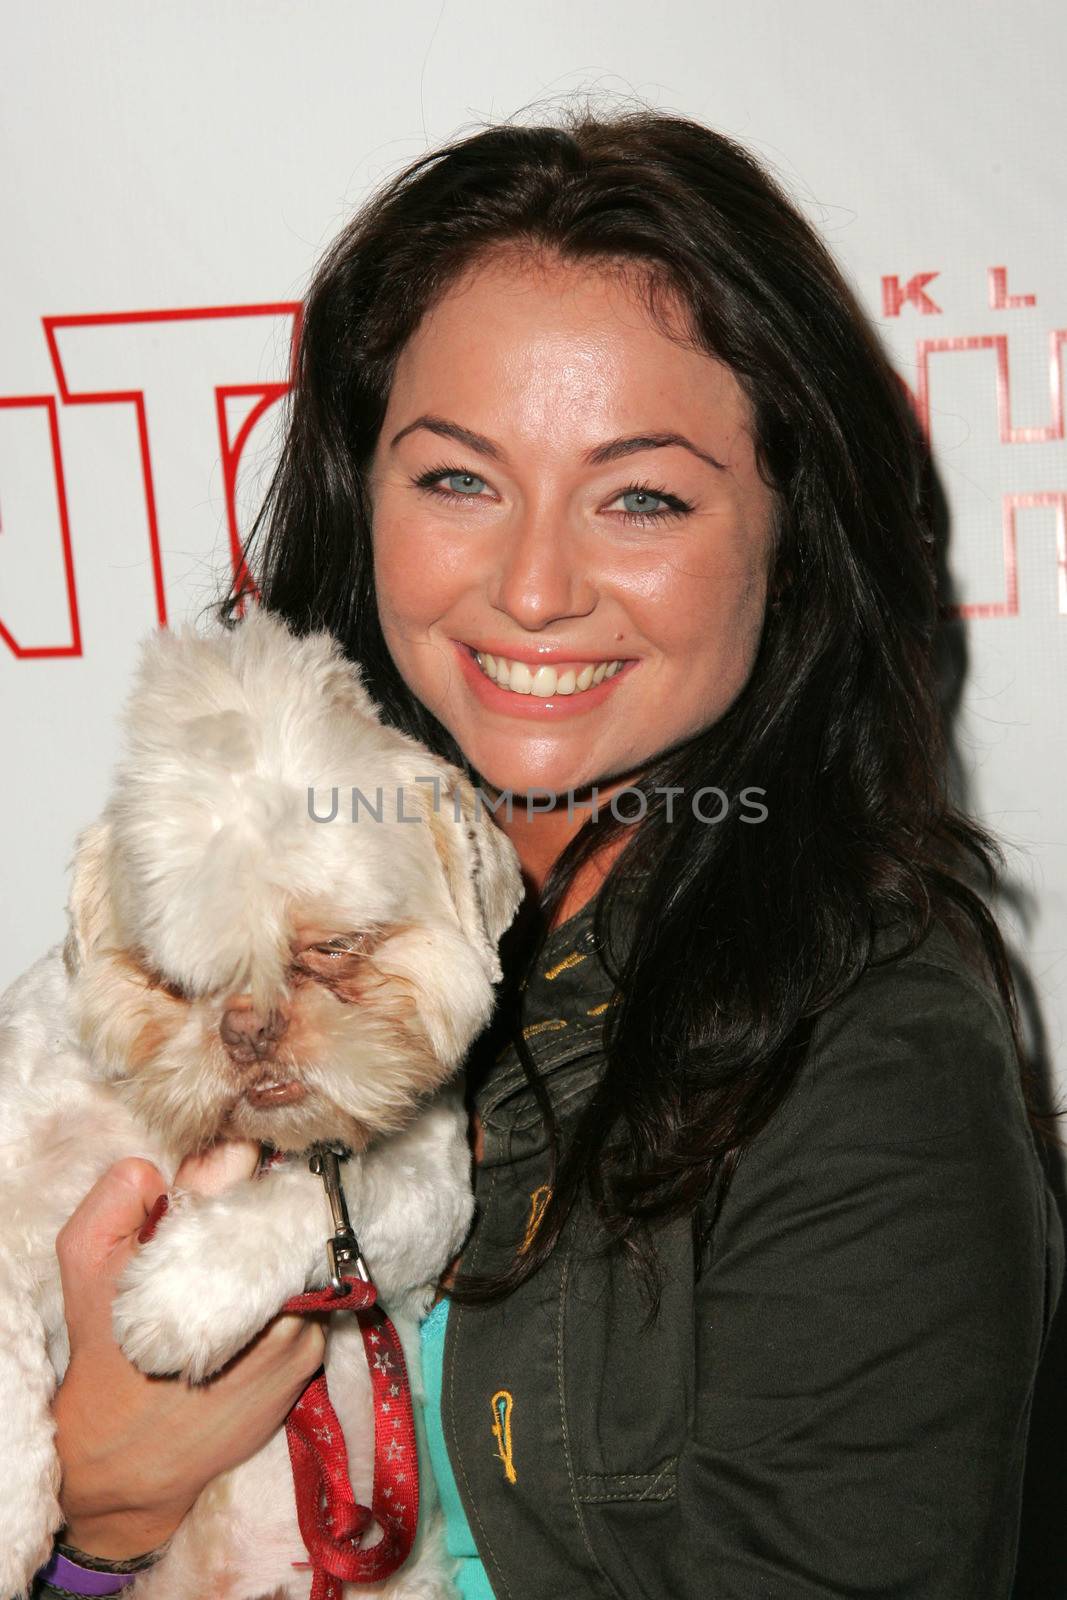 Lindsey Labrum and Sumo at the In Touch Presents Pets And Their Stars Party, Cabana Club, Hollywood, CA 09-21-05